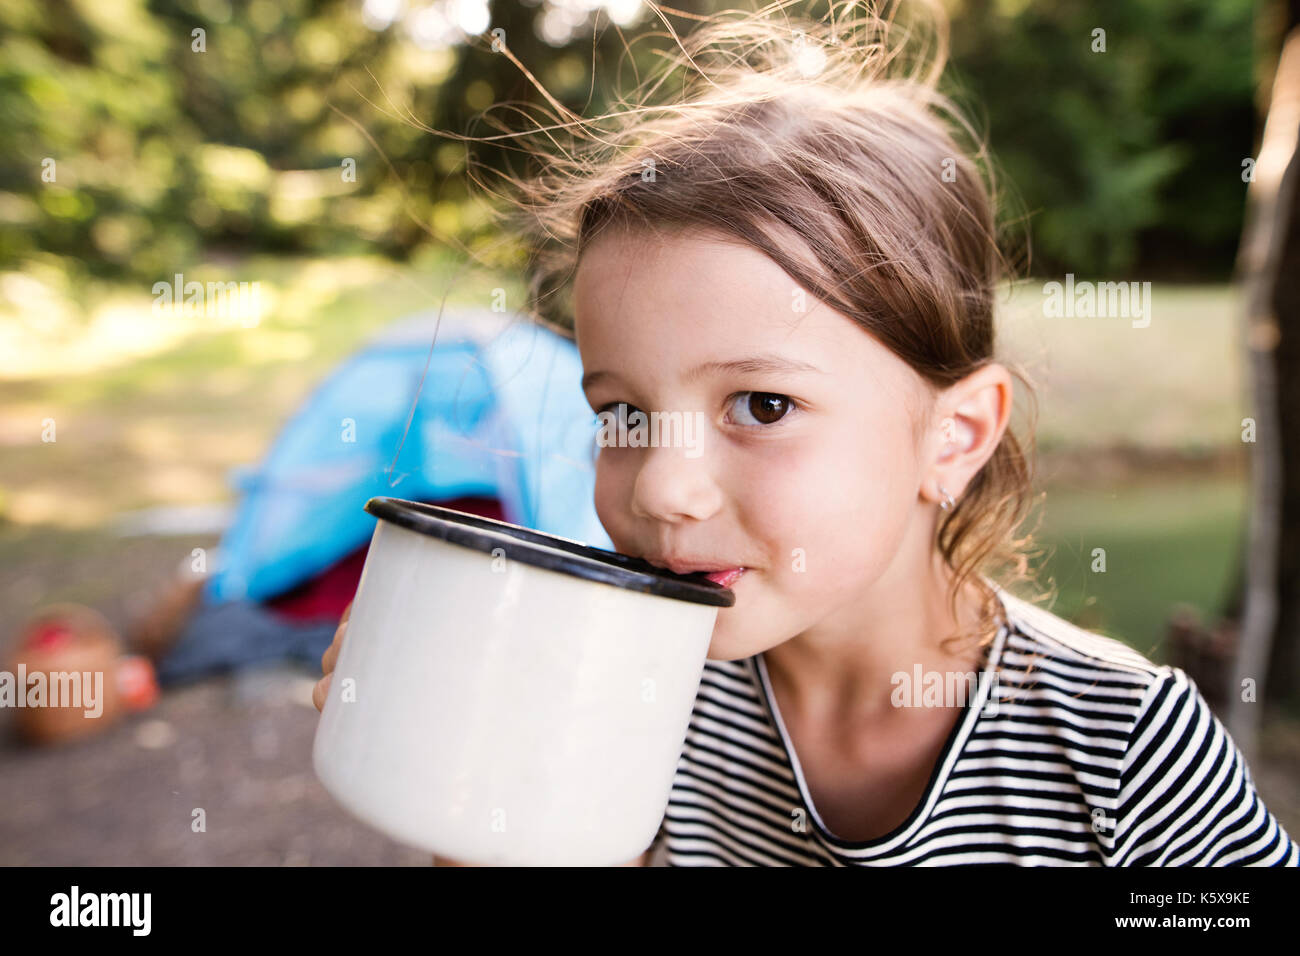 Cute little girl camping outdoors, drinking water. Stock Photo